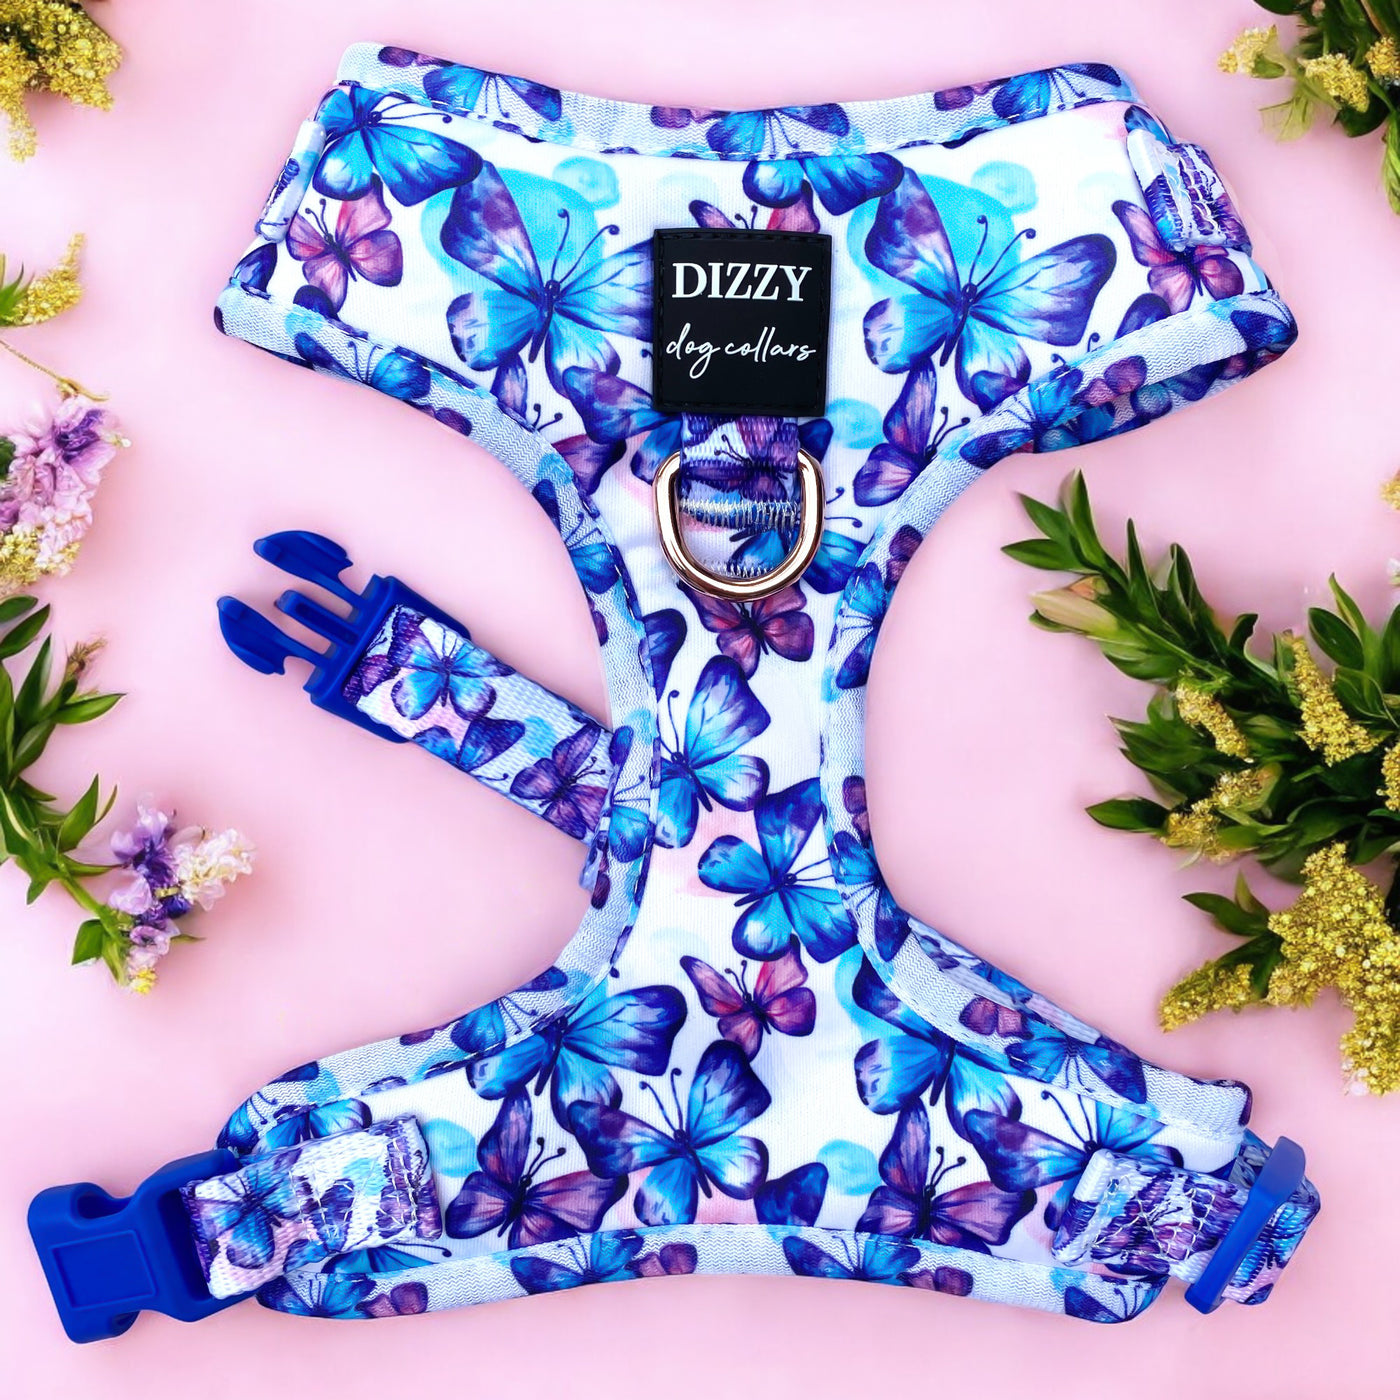 A vibrant dog harness decorated with a butterfly pattern in shades of blue and purple is displayed against a light pink background. The harness features a sturdy D-ring and adjustable blue plastic buckles. The label reads "DIZZY dog collars." The image is adorned with sprigs of flowers in green, yellow, and purple hues on the sides, adding a natural touch to the presentation.